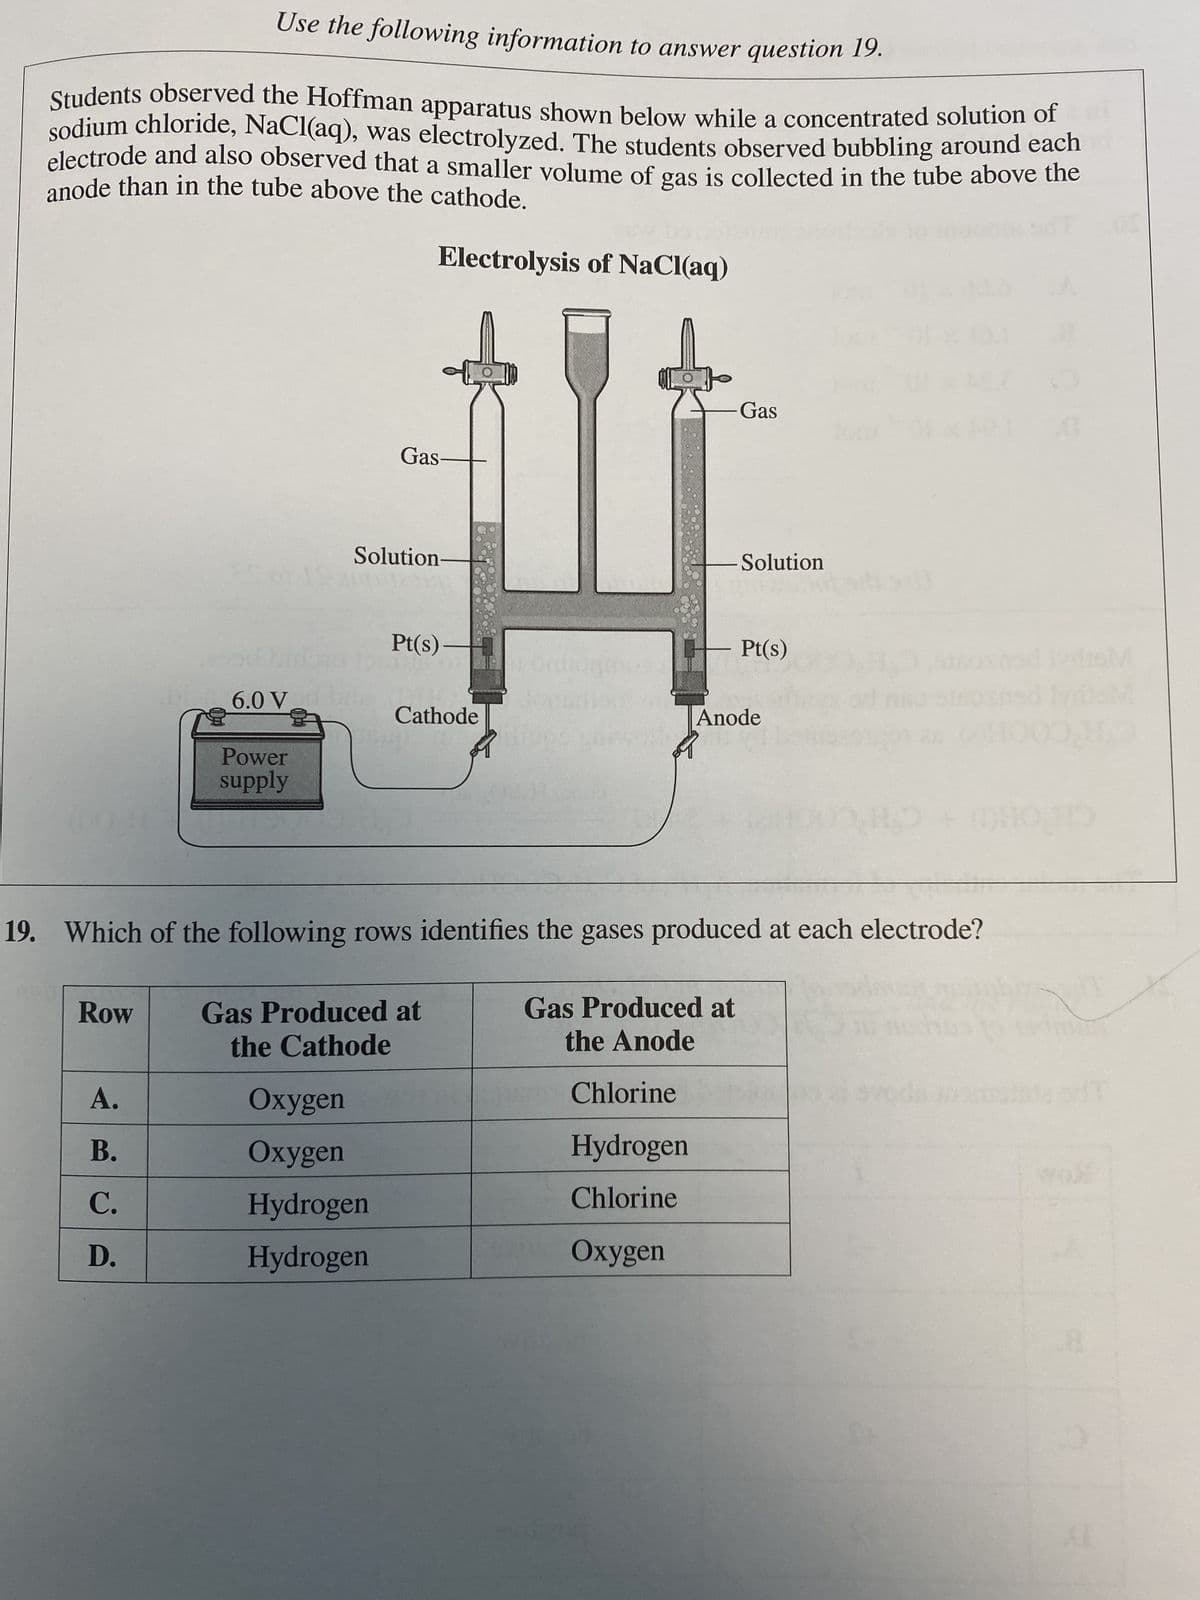 Use the following information to answer question 19.
Students observed the Hoffman apparatus shown below while a concentrated solution of
sodium chloride, NaCl(aq), was electrolyzed. The students observed bubbling around each
anode than in the tube above the cathode.
electrode and also observed that a smaller volume of gas is collected in the tube above the
(00:4
Row
6.0 V
A.
B.
C.
D.
Power
supply
Electrolysis of NaCl(aq)
Gas-
Solution-
Oxygen
Oxygen
Hydrogen
Hydrogen
Pt(s)
Cathode
Gas Produced at
the Cathode
19. Which of the following rows identifies the gases produced at each electrode?
Gas
Gas Produced at
the Anode
Chlorine
Hydrogen
Chlorine
Oxygen
Solution
90
Pt(s)
Anode
H